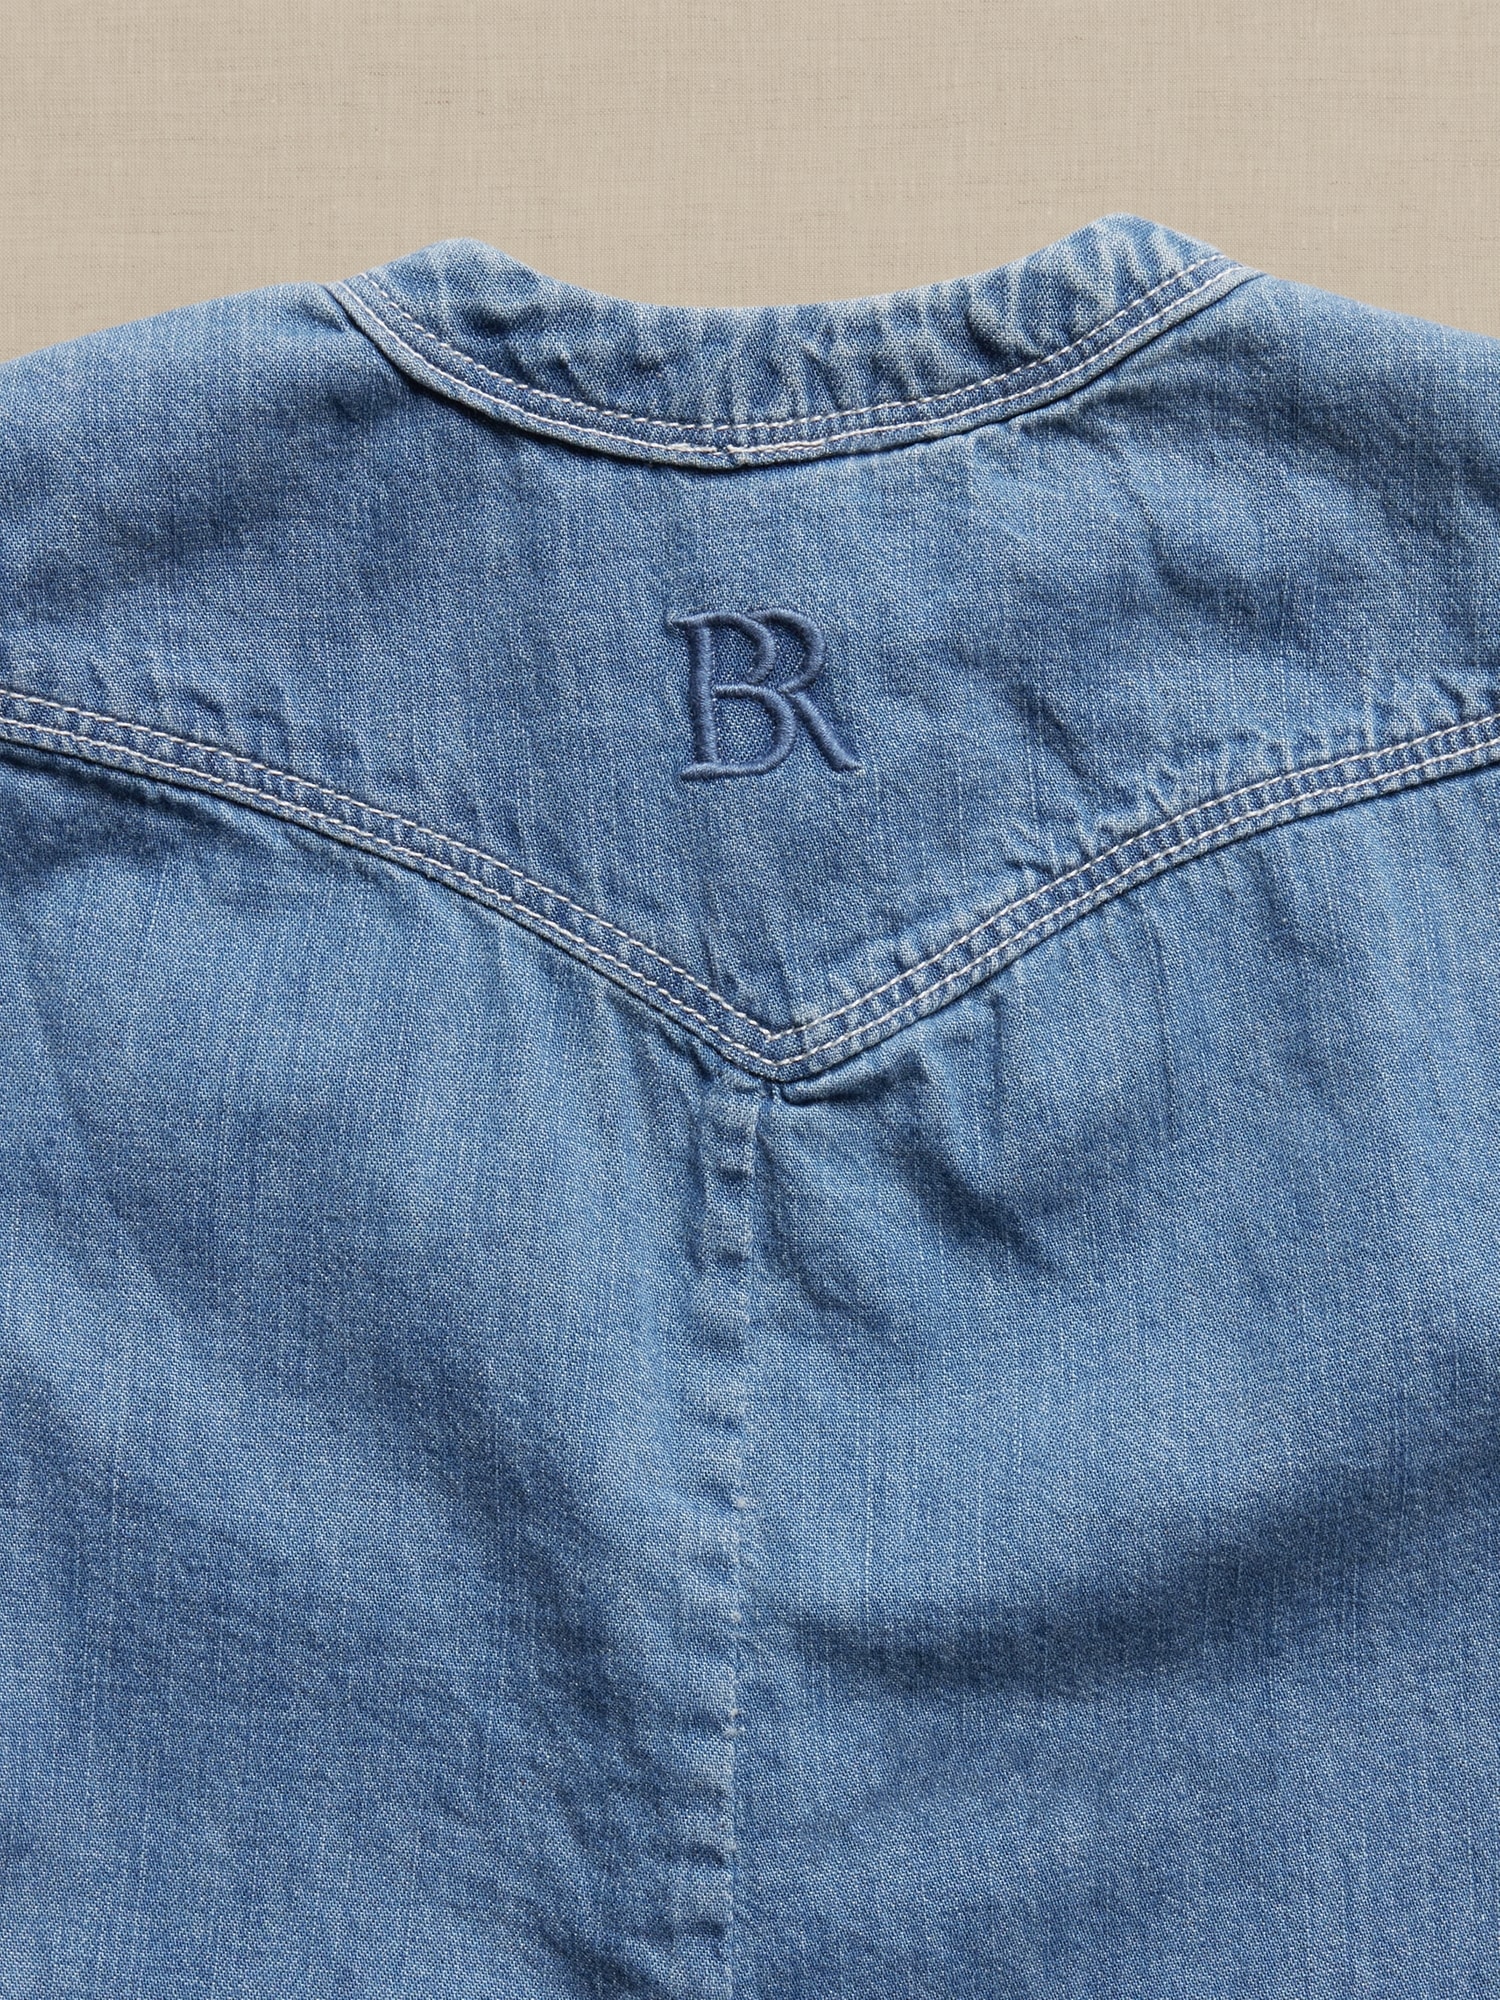 Chambray Romper for Baby